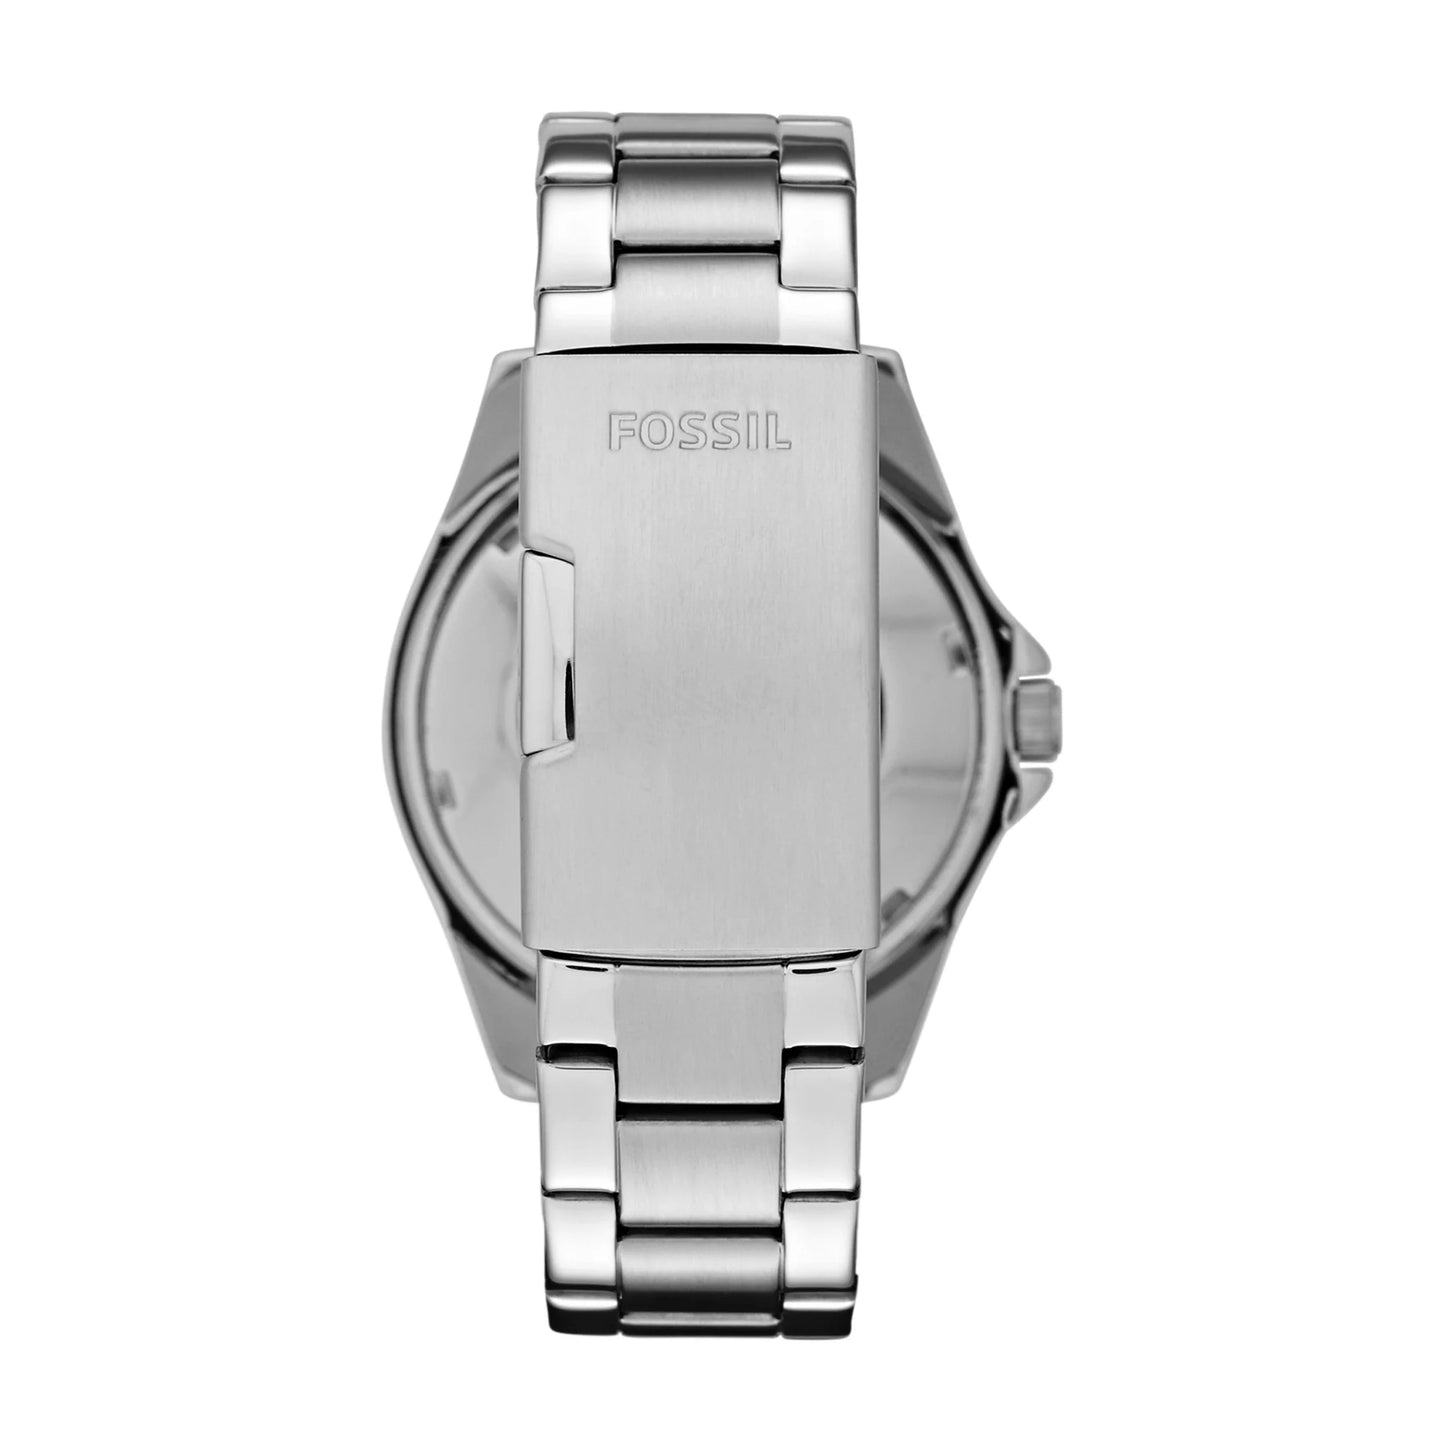 Riley Multifunction Stainless Steel Watch